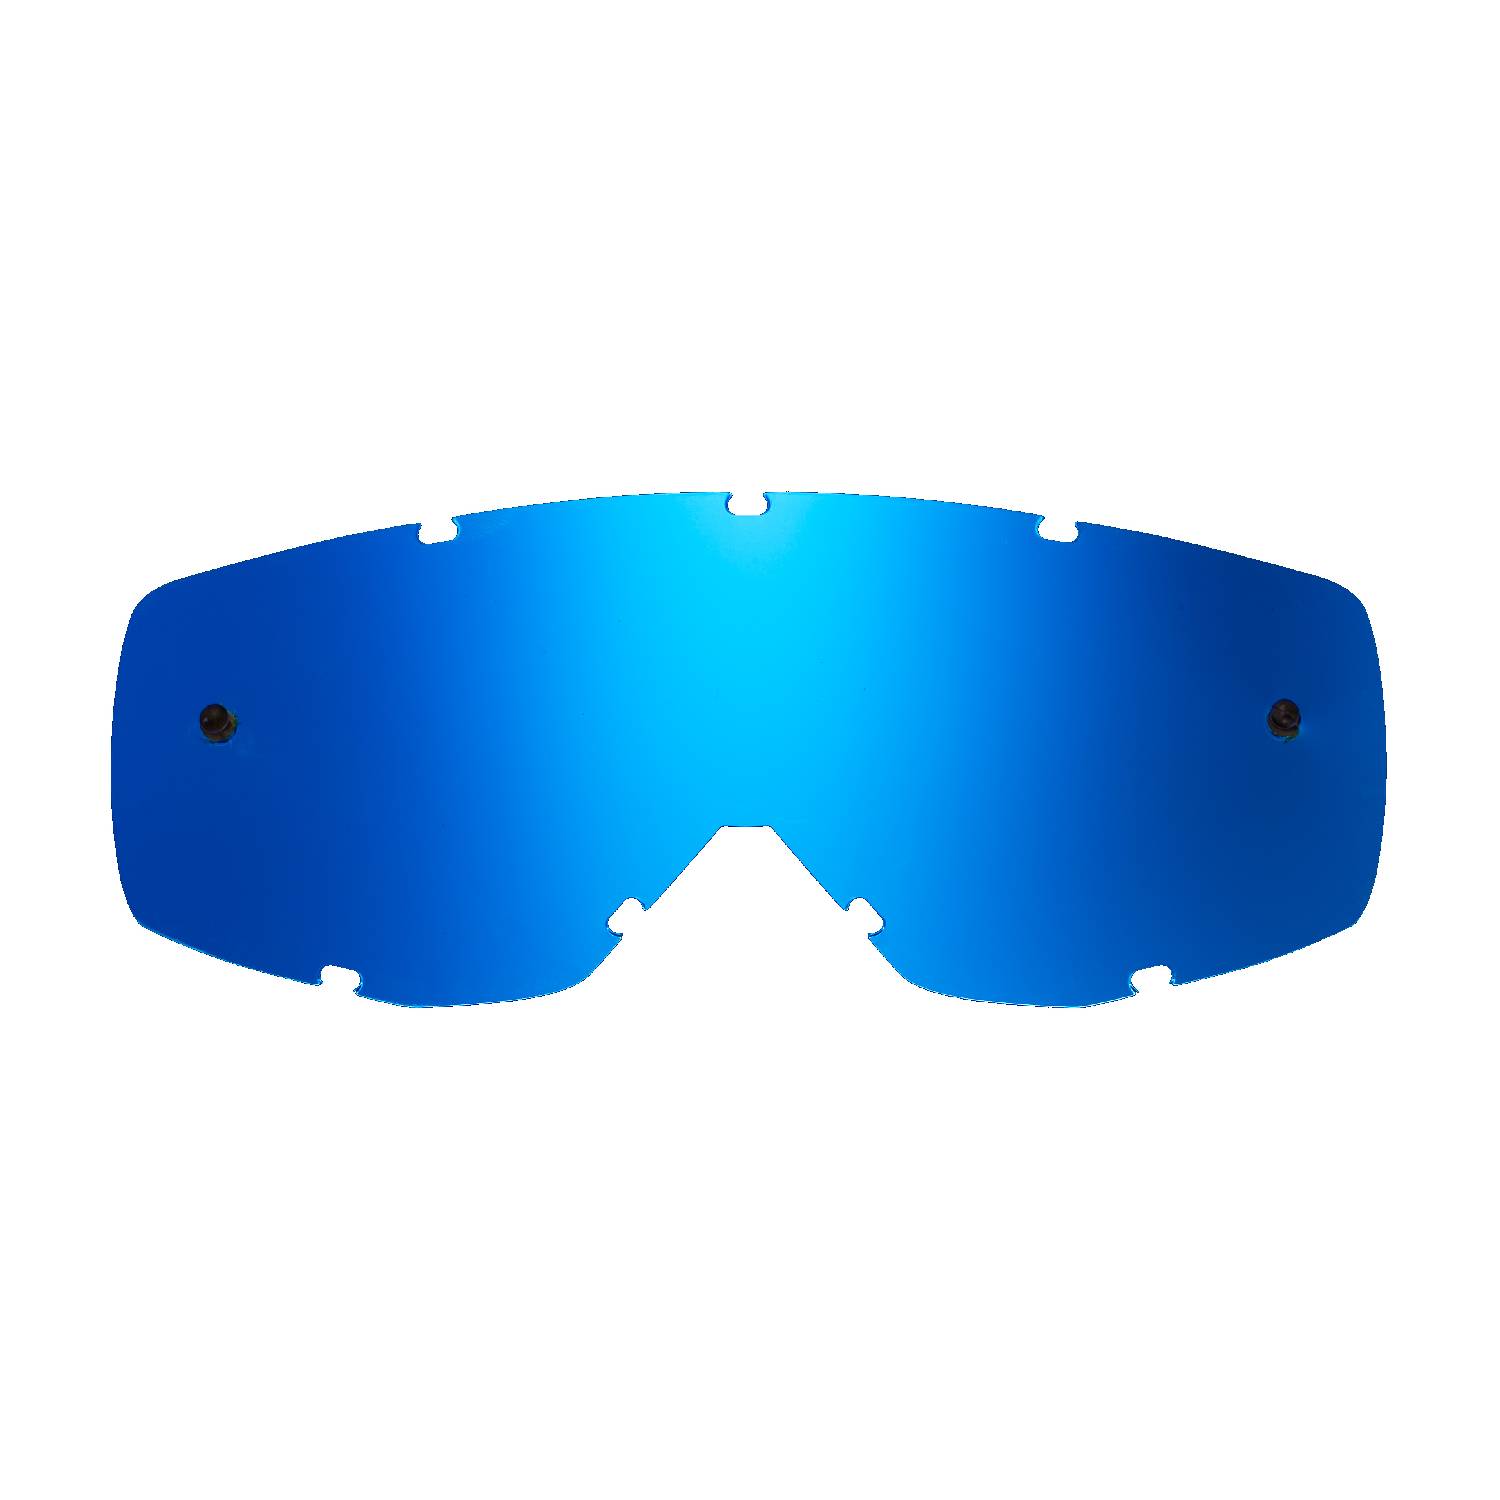 blue-toned mirrored replacement lenses for goggles compatible for Scott Hustle/ Primal / Tyrant / Split goggle